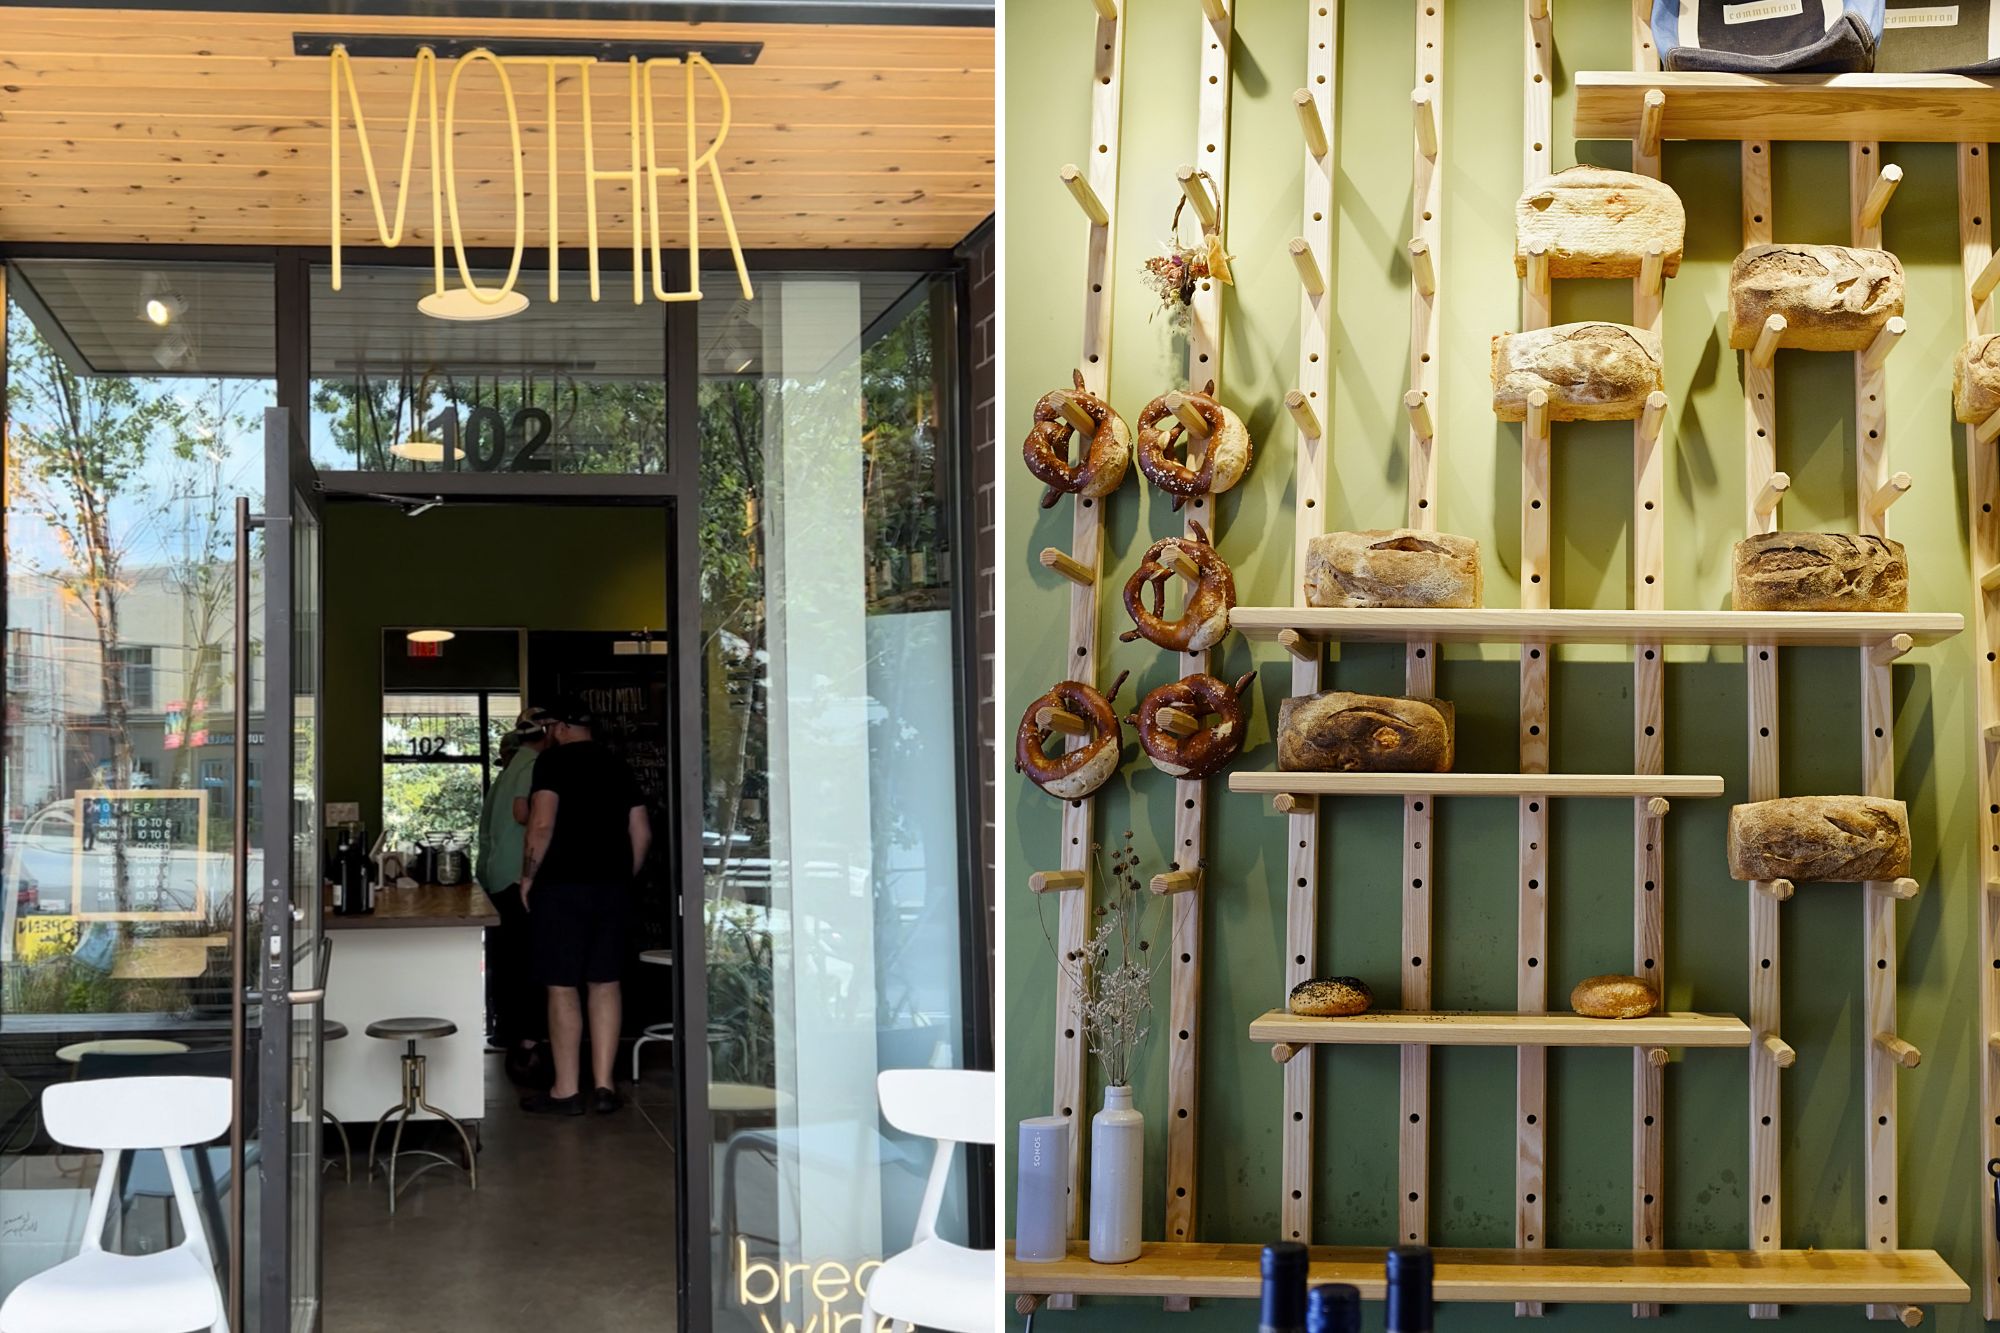 Exterior of mother bread and wine and a wall of bread and pretzels